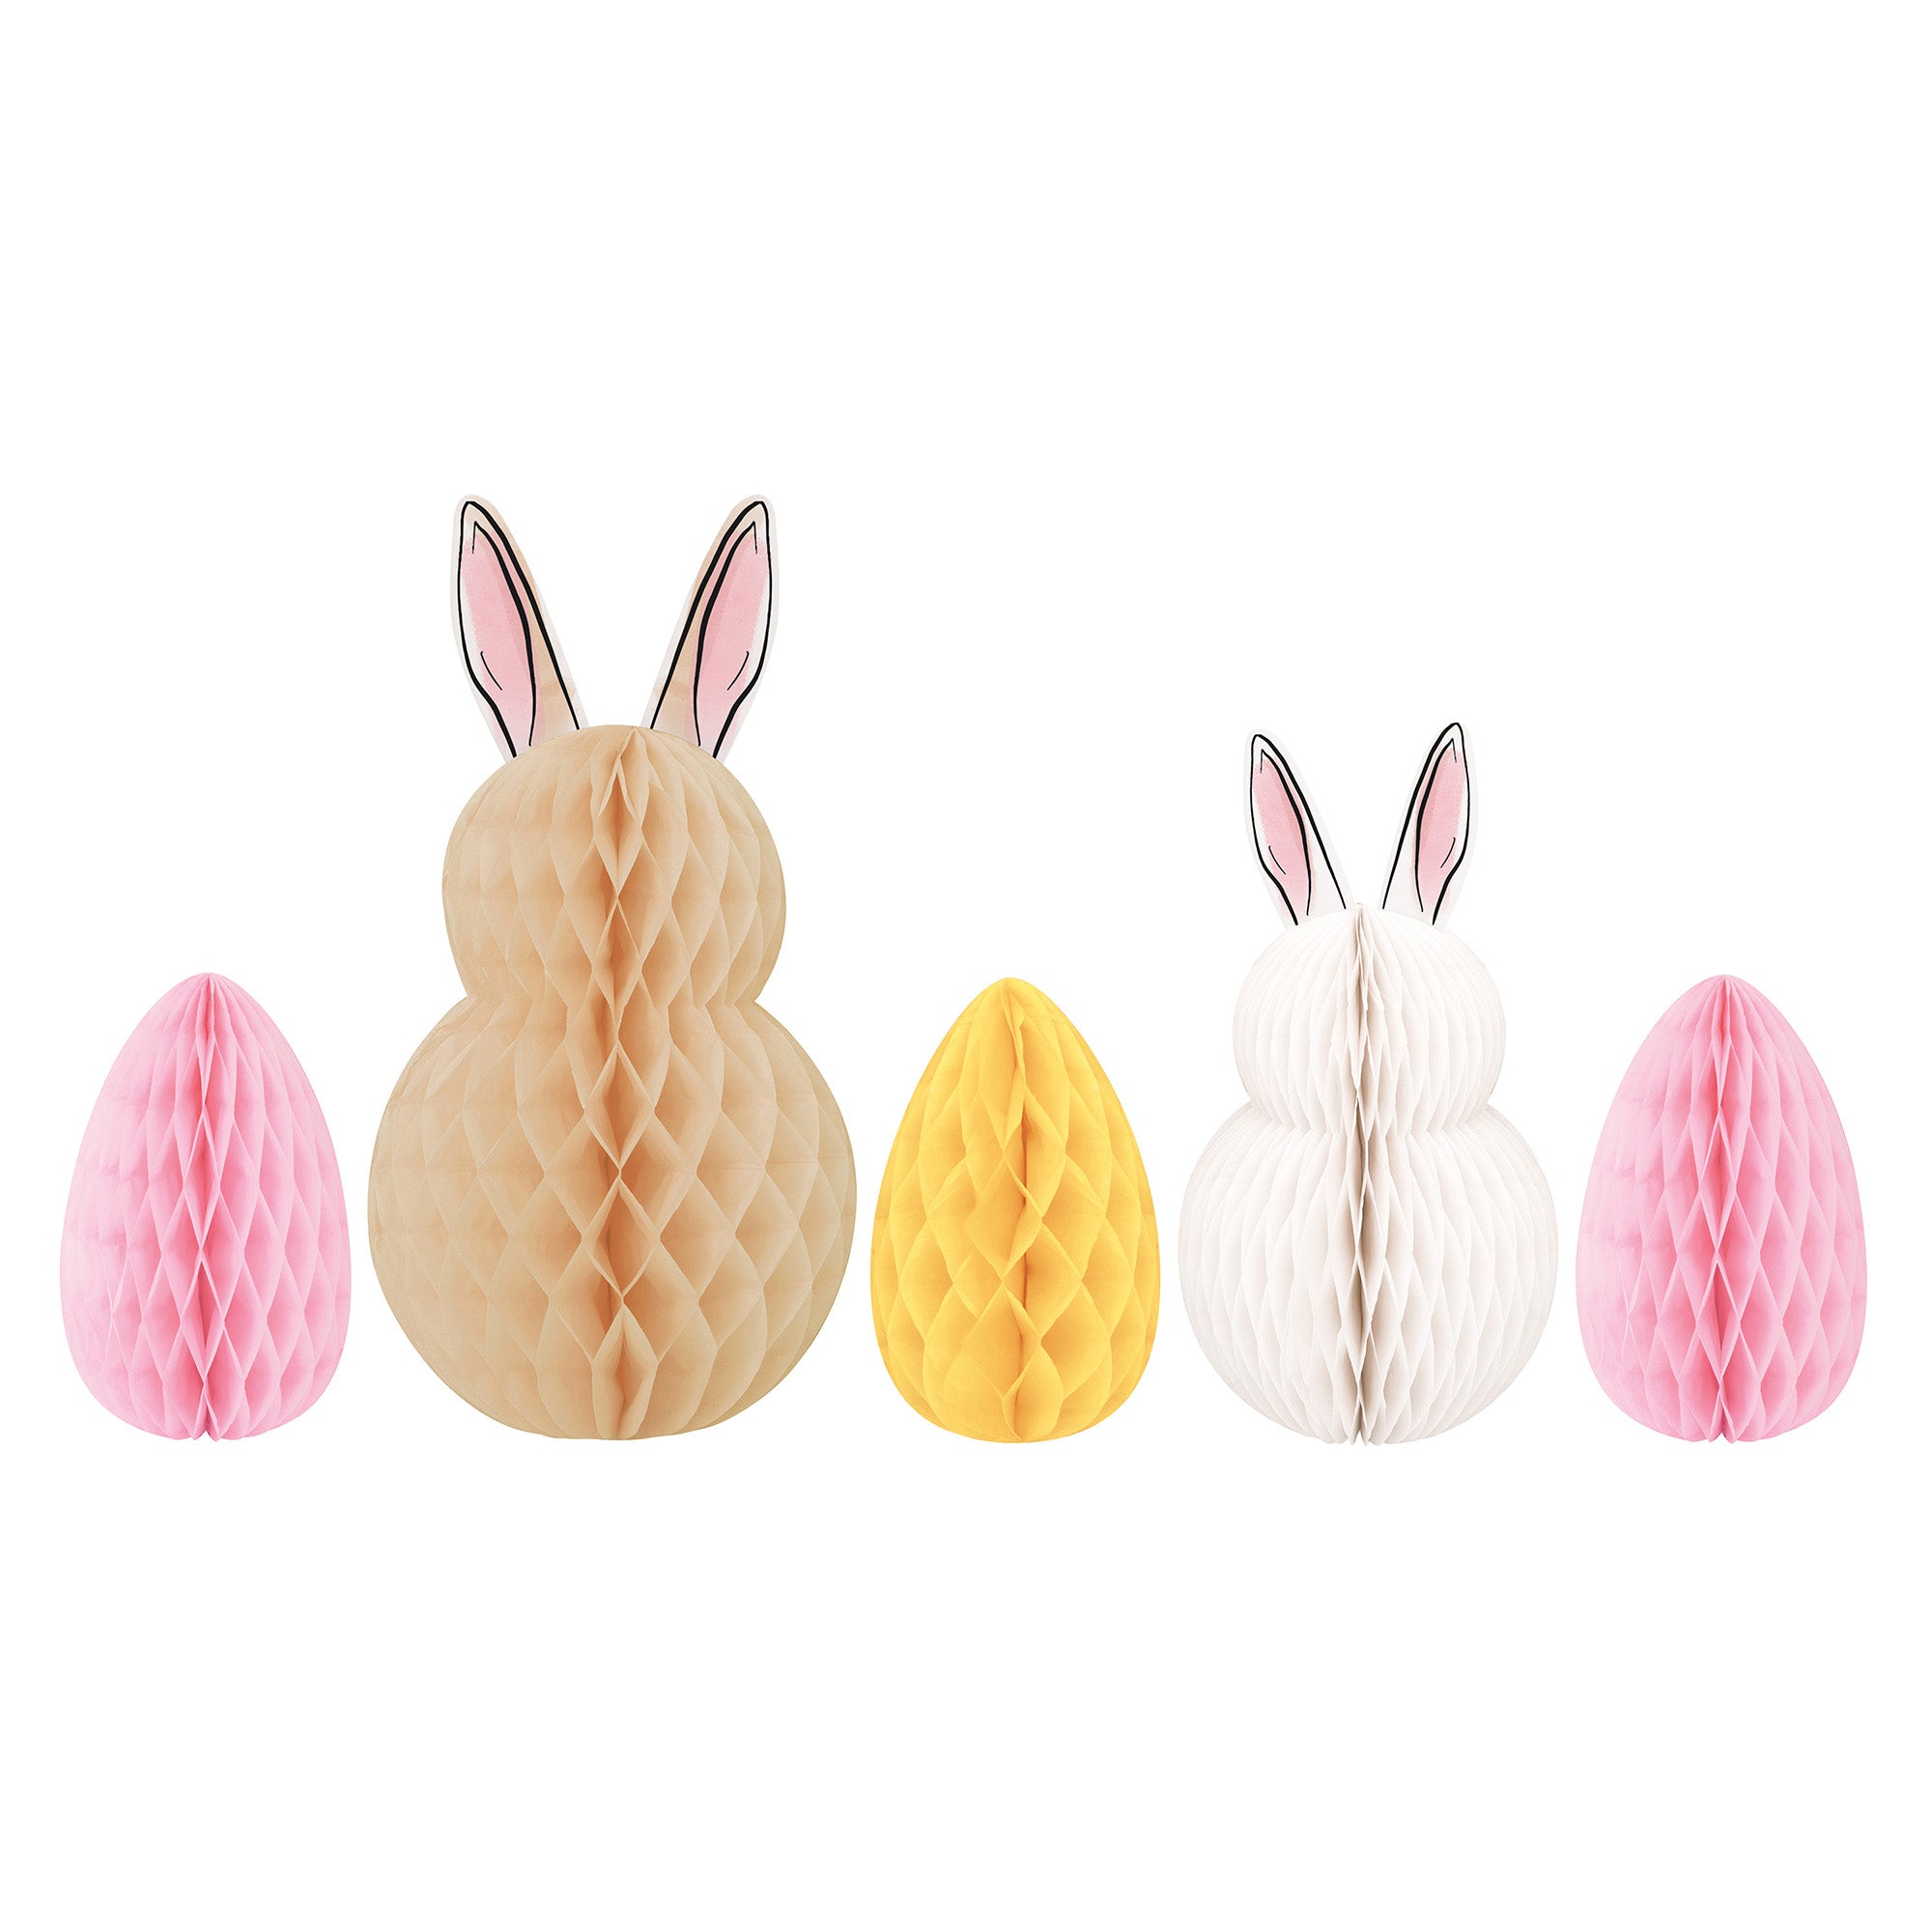 Egg-stra Accents 5 Bunny and Easter Egg Honeycomb Centerpiece Decorations